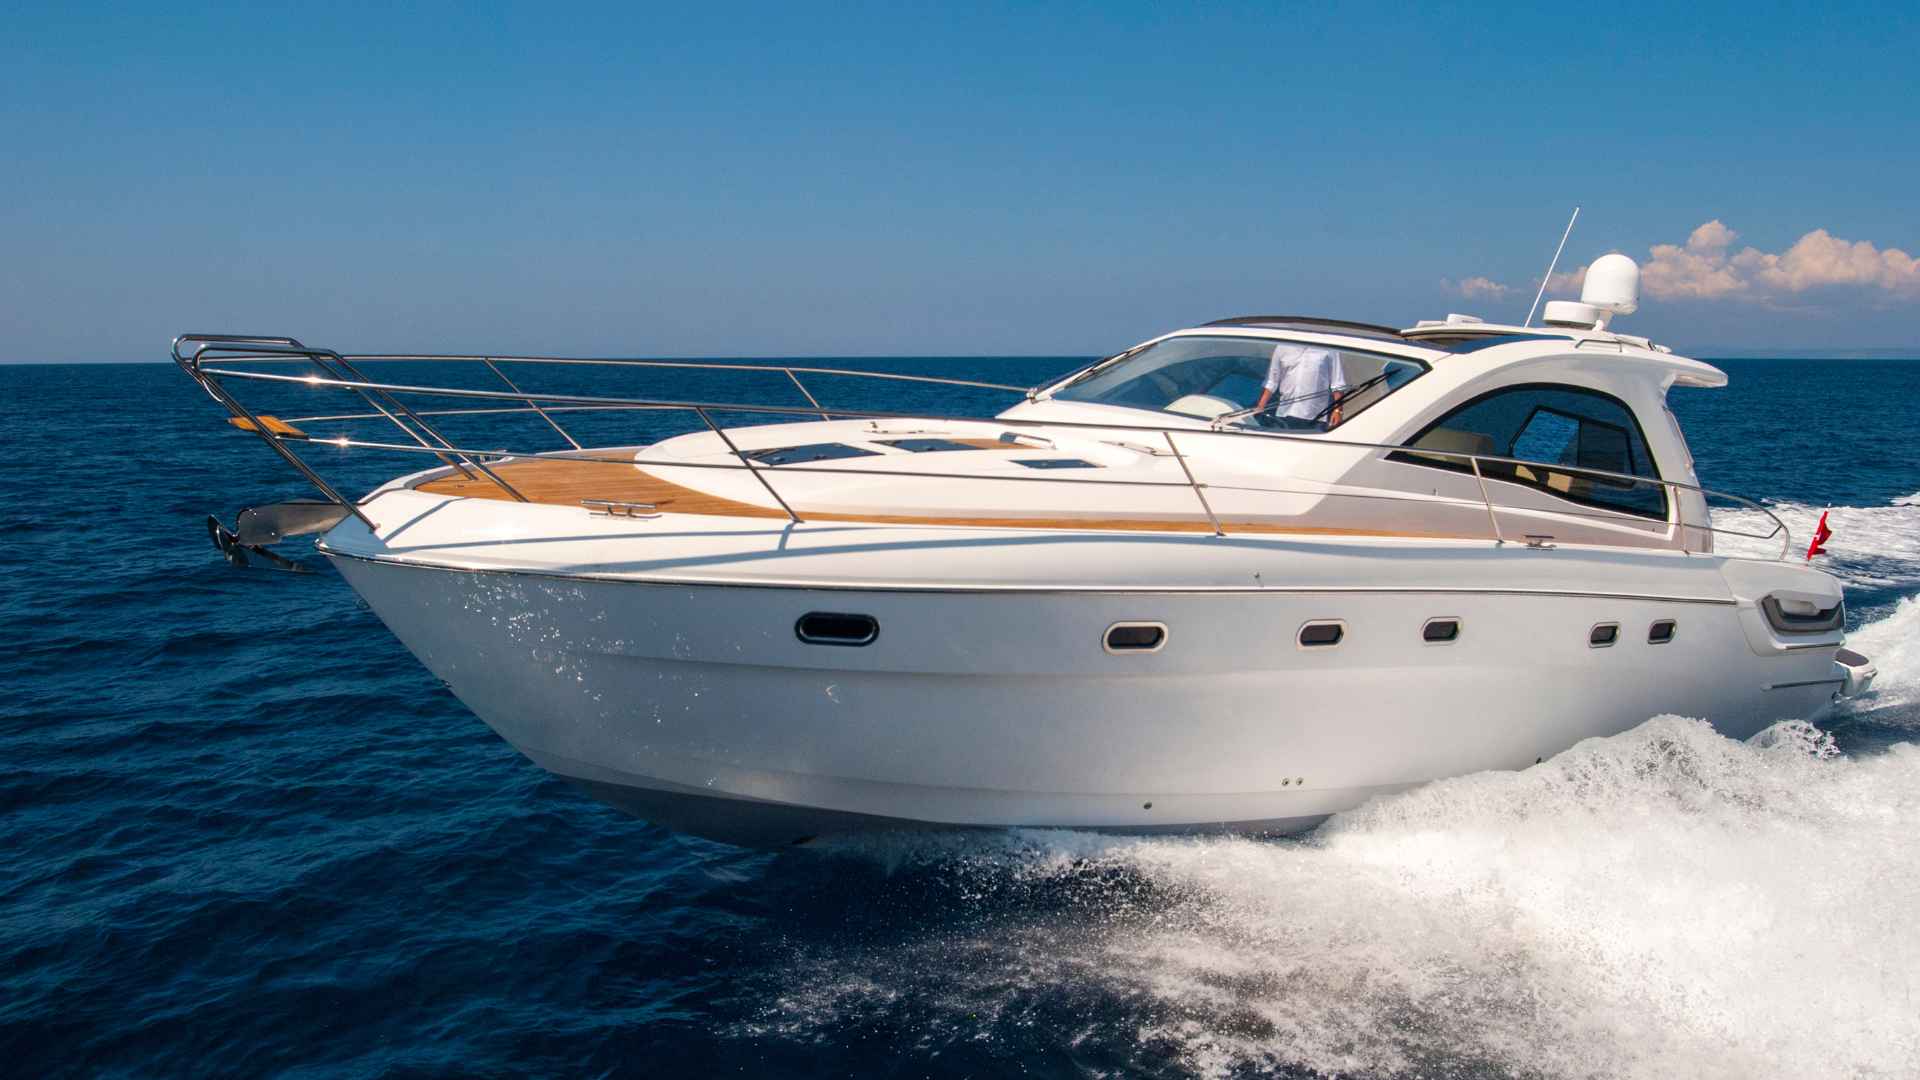 How Much Does a Boat Cost to Own: 5 Key Factors to Consider